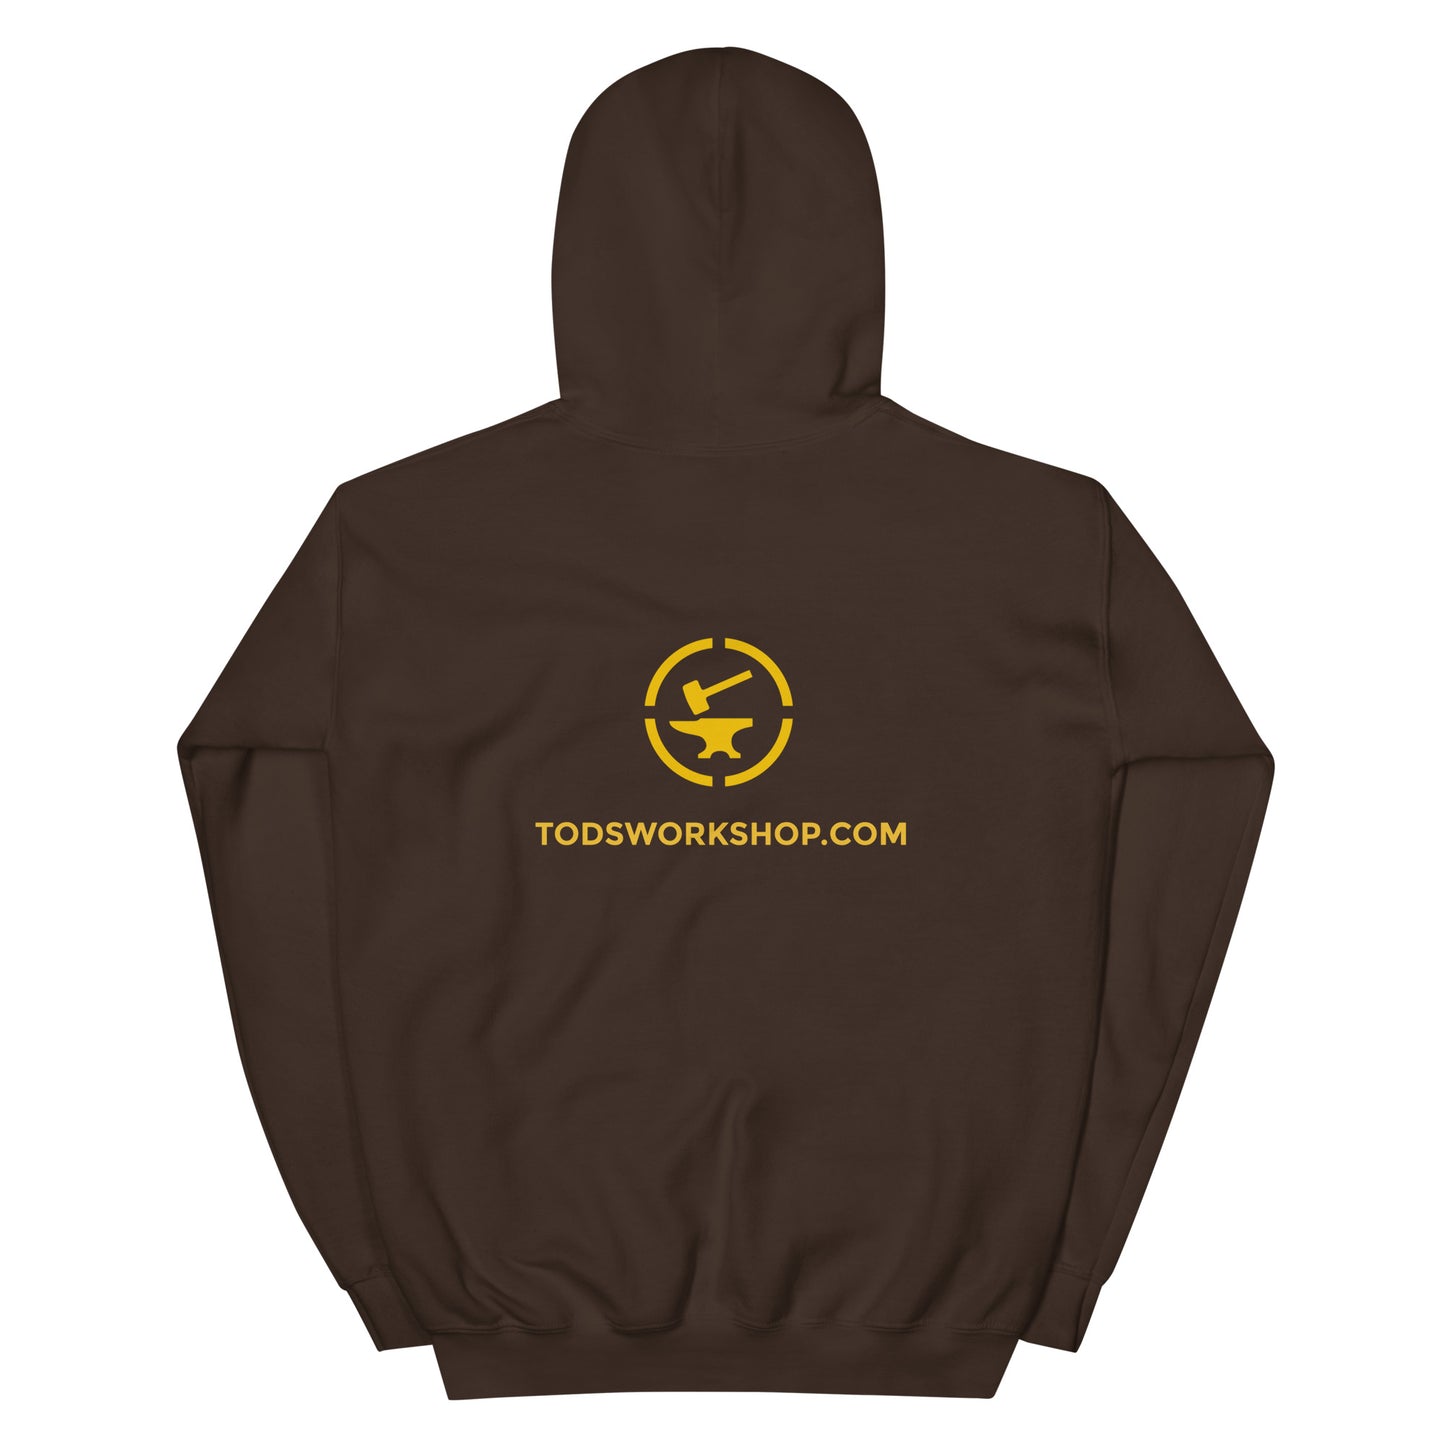 
                  
                    'Irresistible Force, Immovable Object' - Tod's Workshop Unisex Hoodie
                  
                